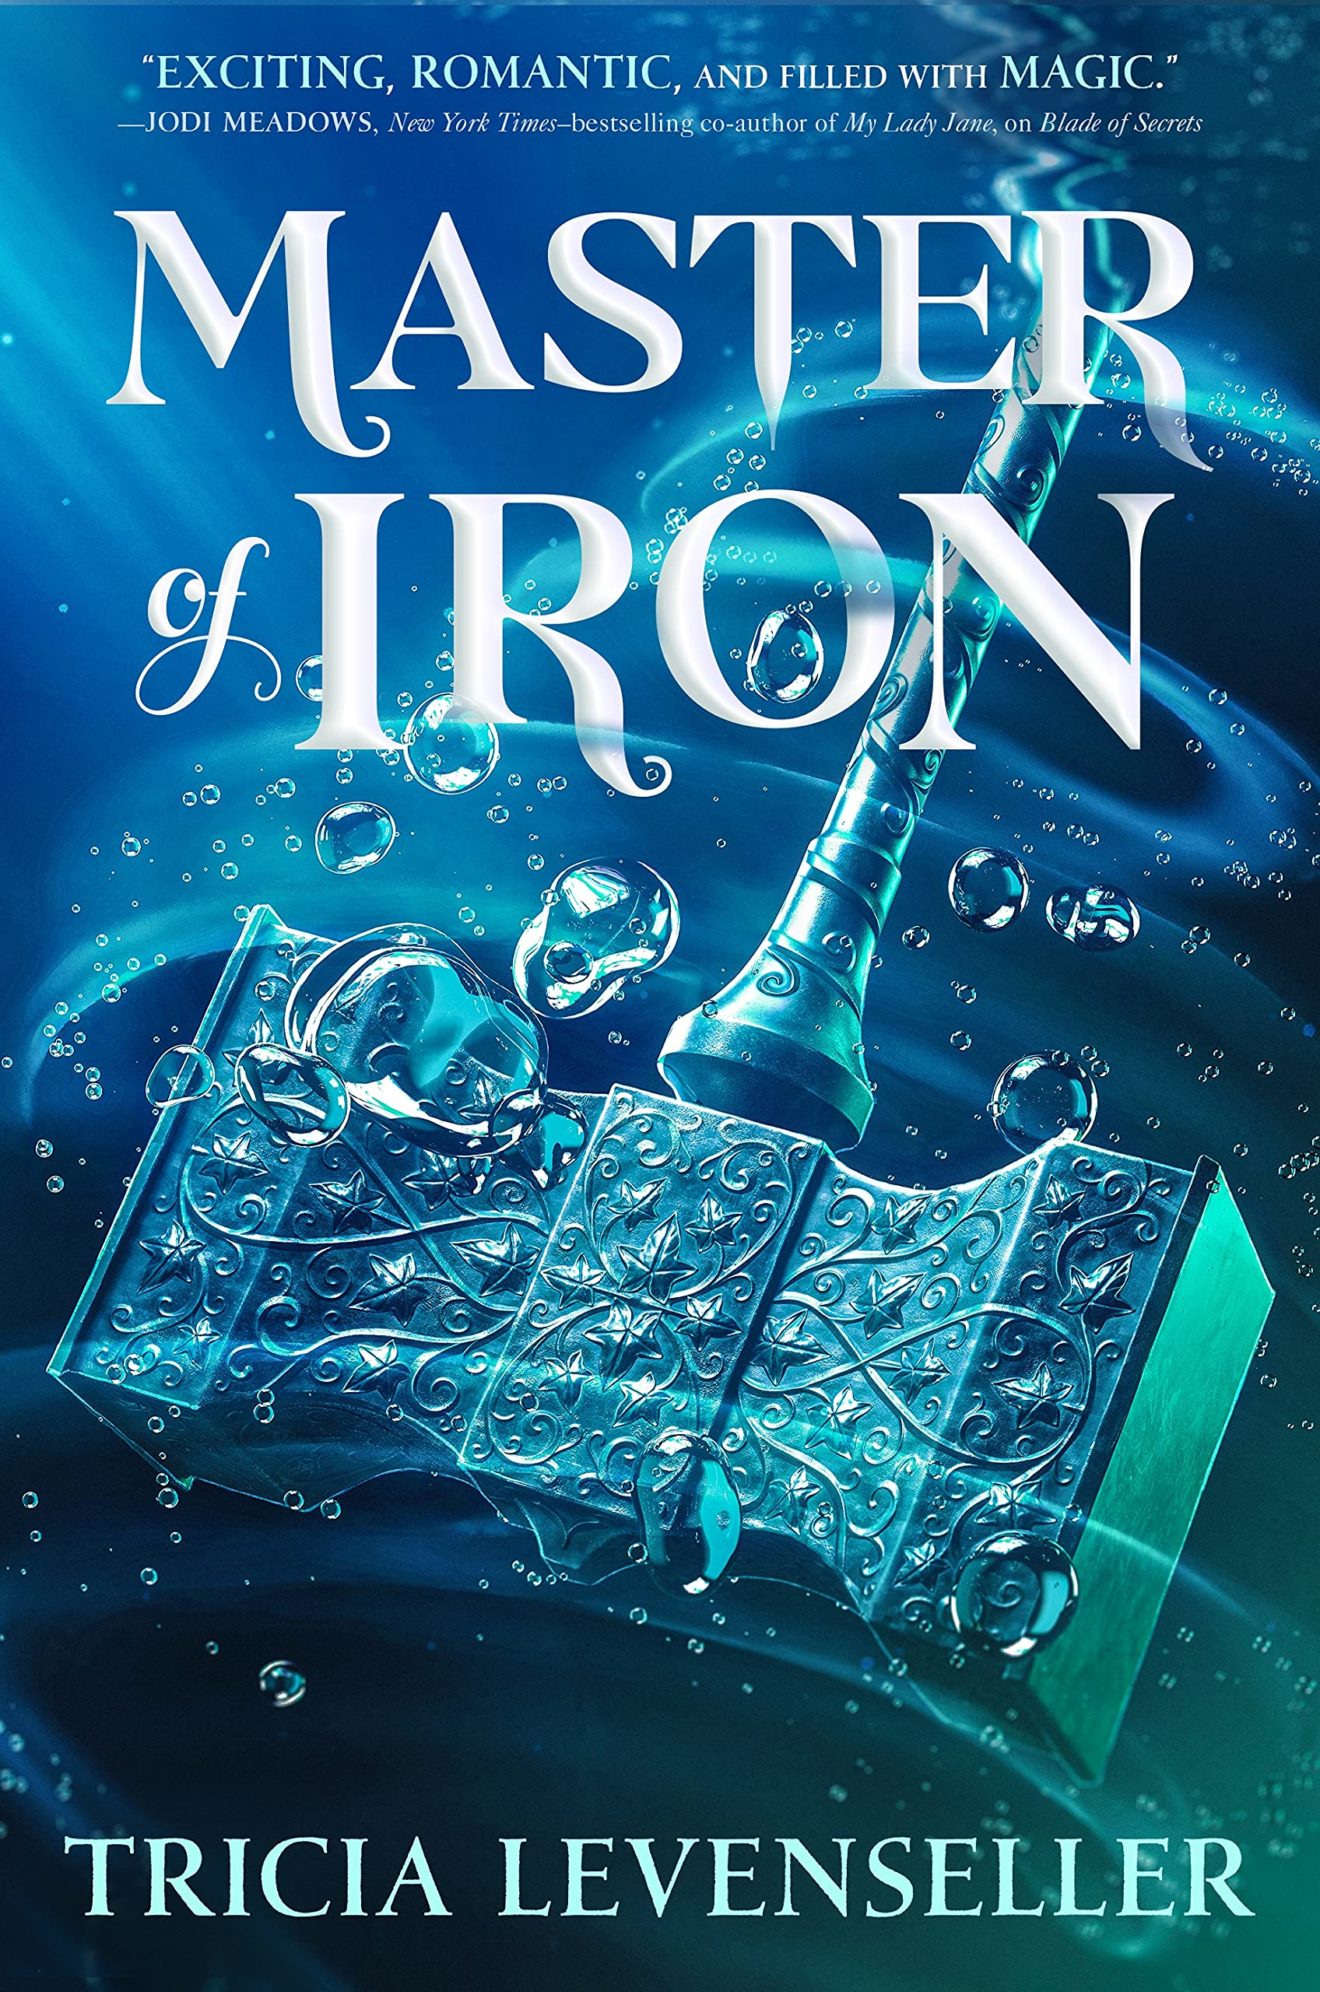 tricia levenseller master of iron